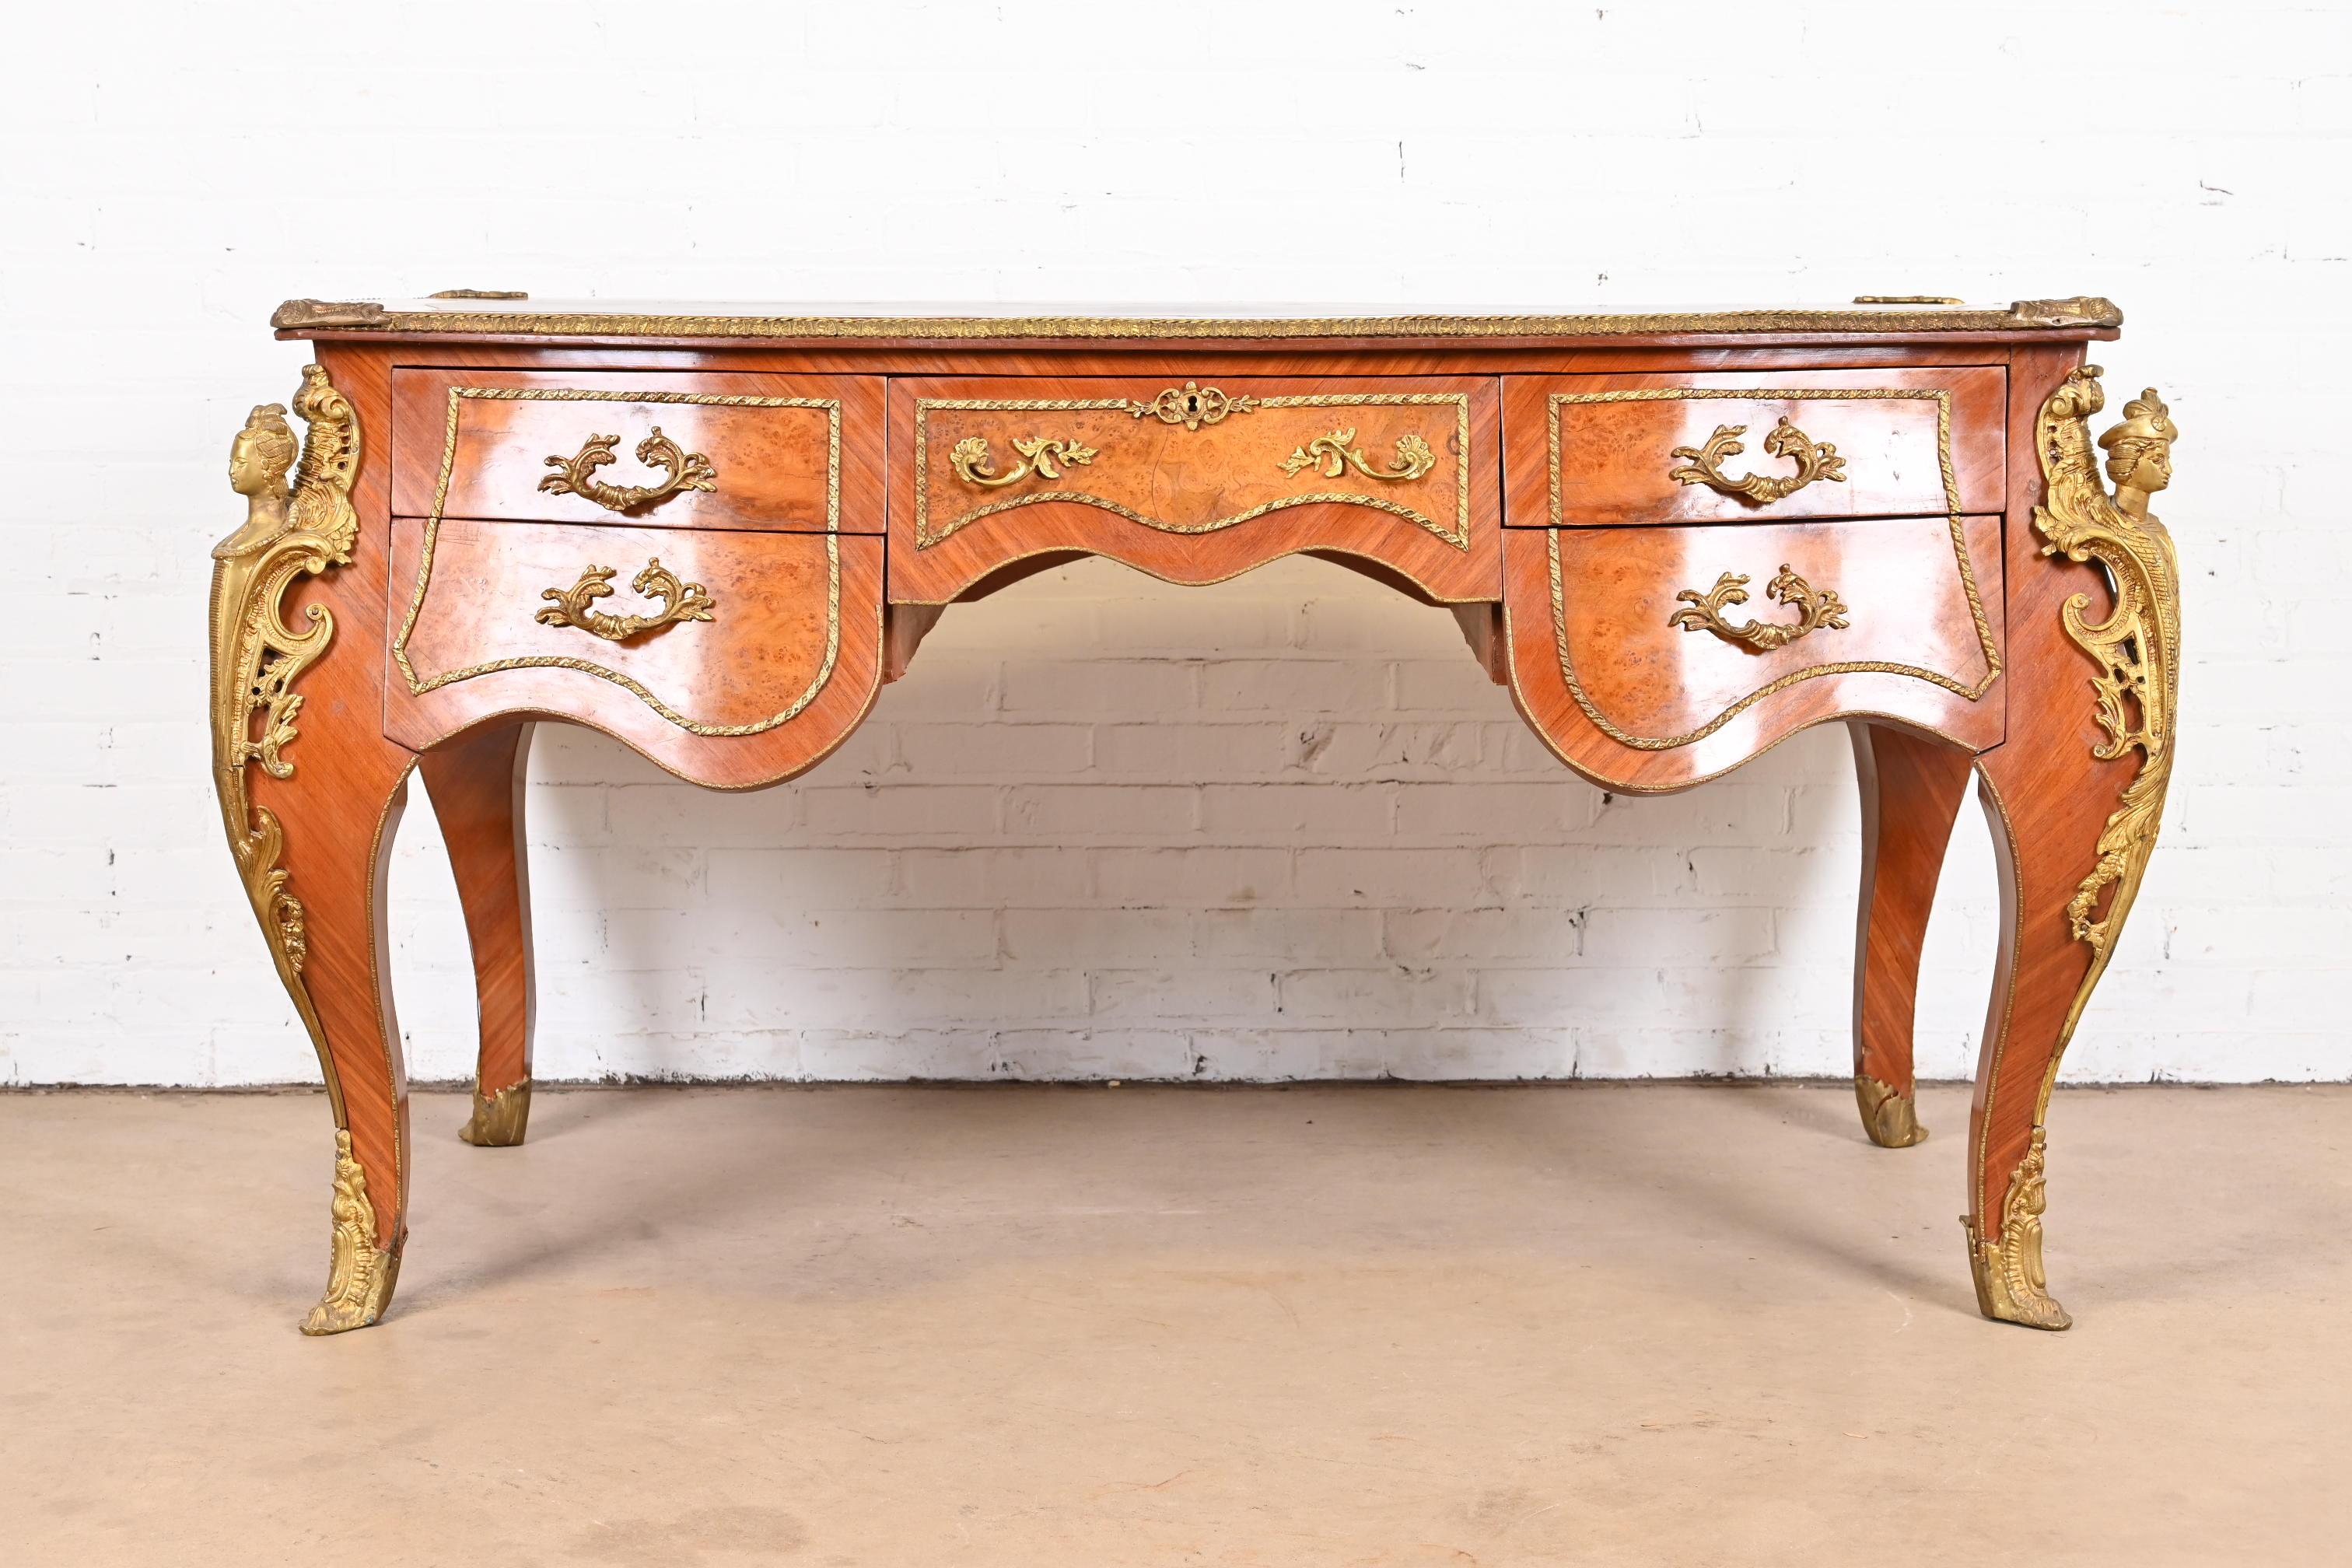 French Louis XV Kingwood and Burl Wood Bureau Plat Leather Top Desk with Ormolu In Good Condition For Sale In South Bend, IN